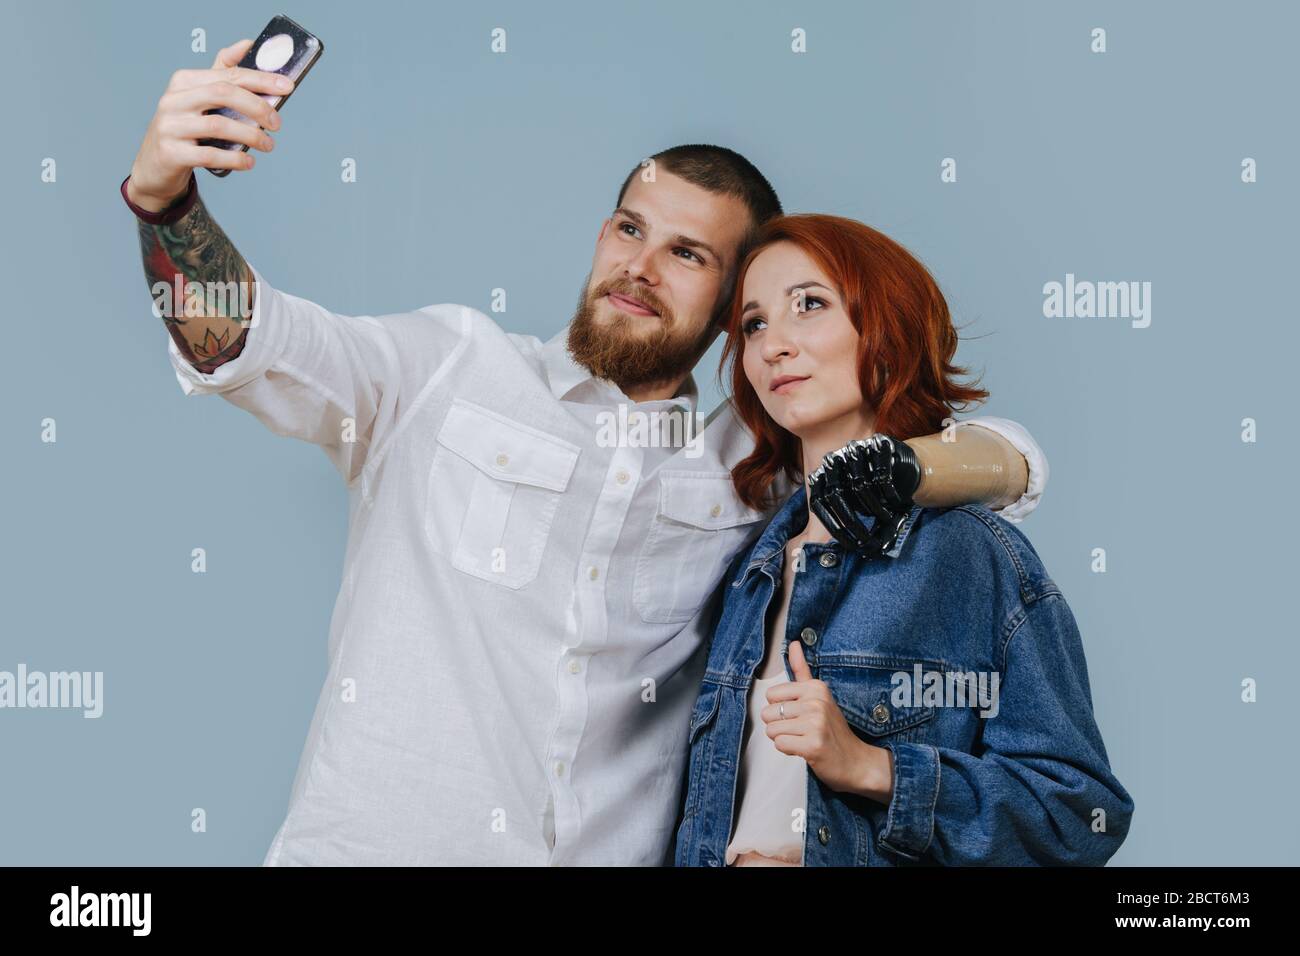 Bionic man taking selfie with a woman over blue background Stock Photo